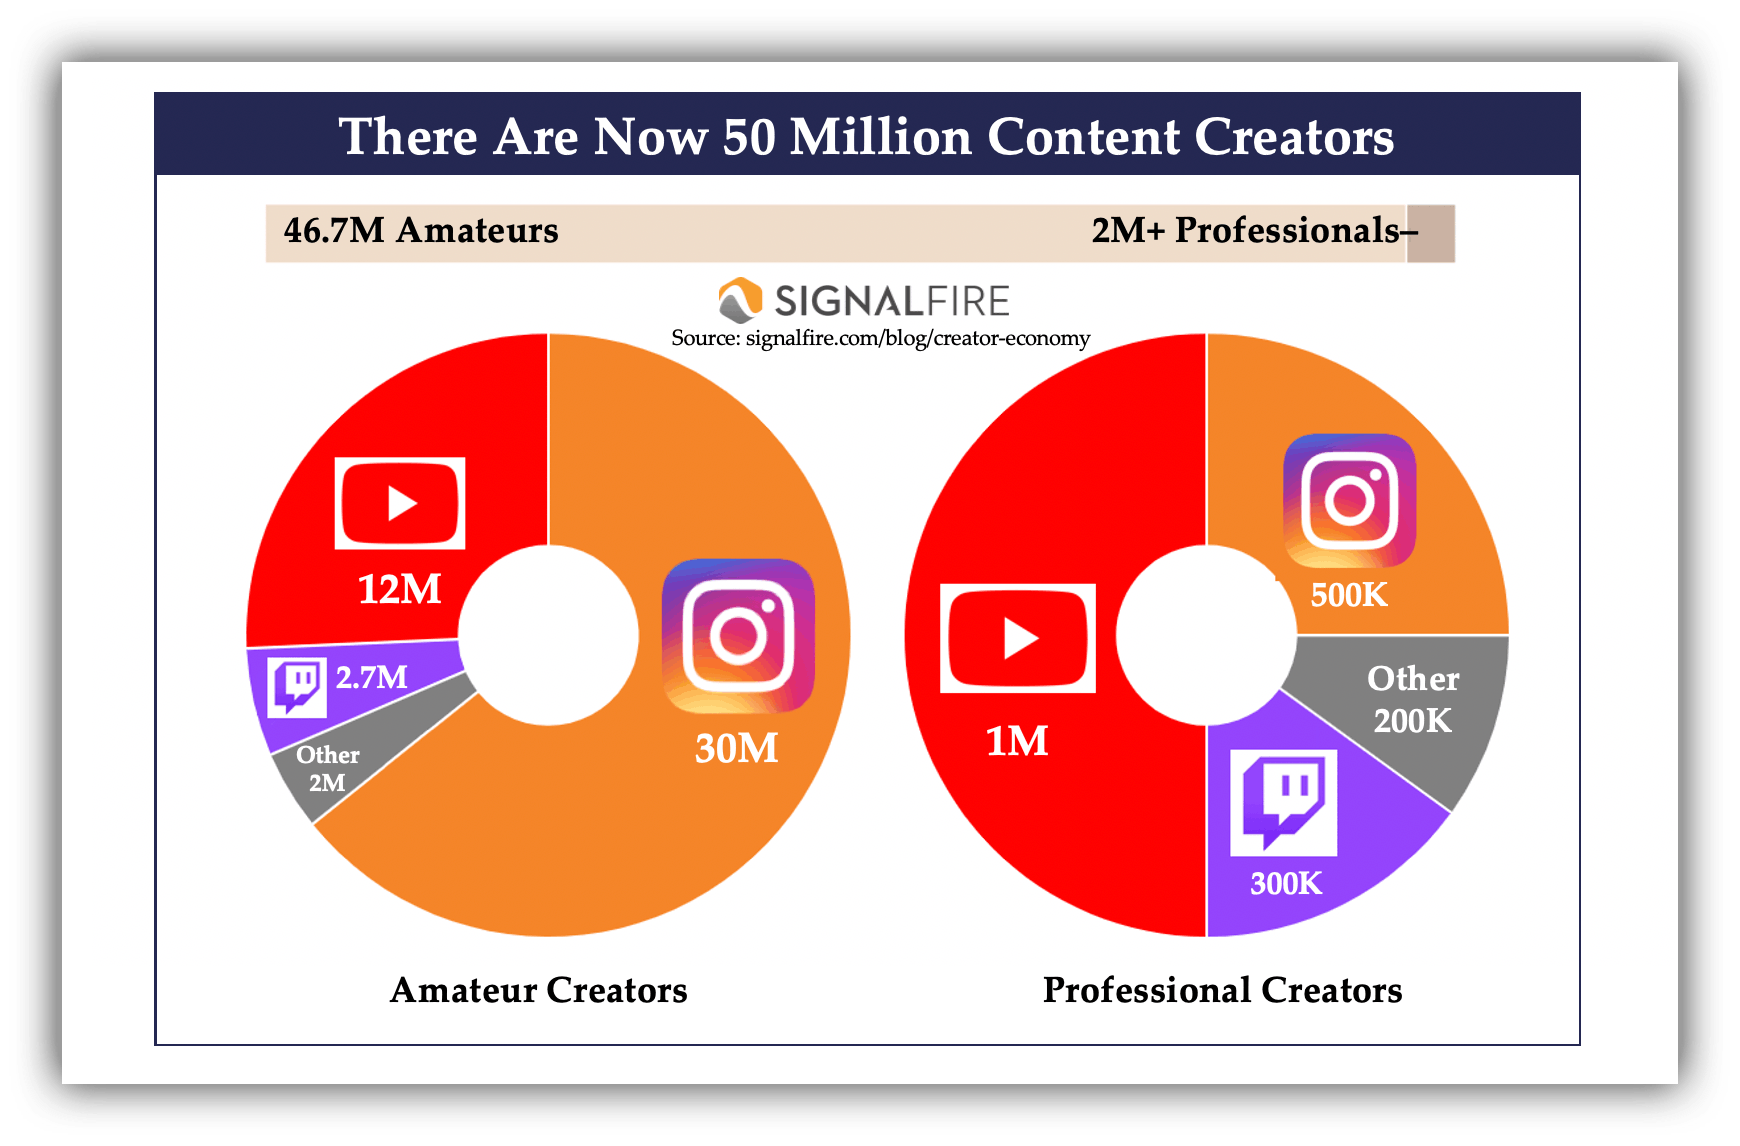 content creator radious on different platforms